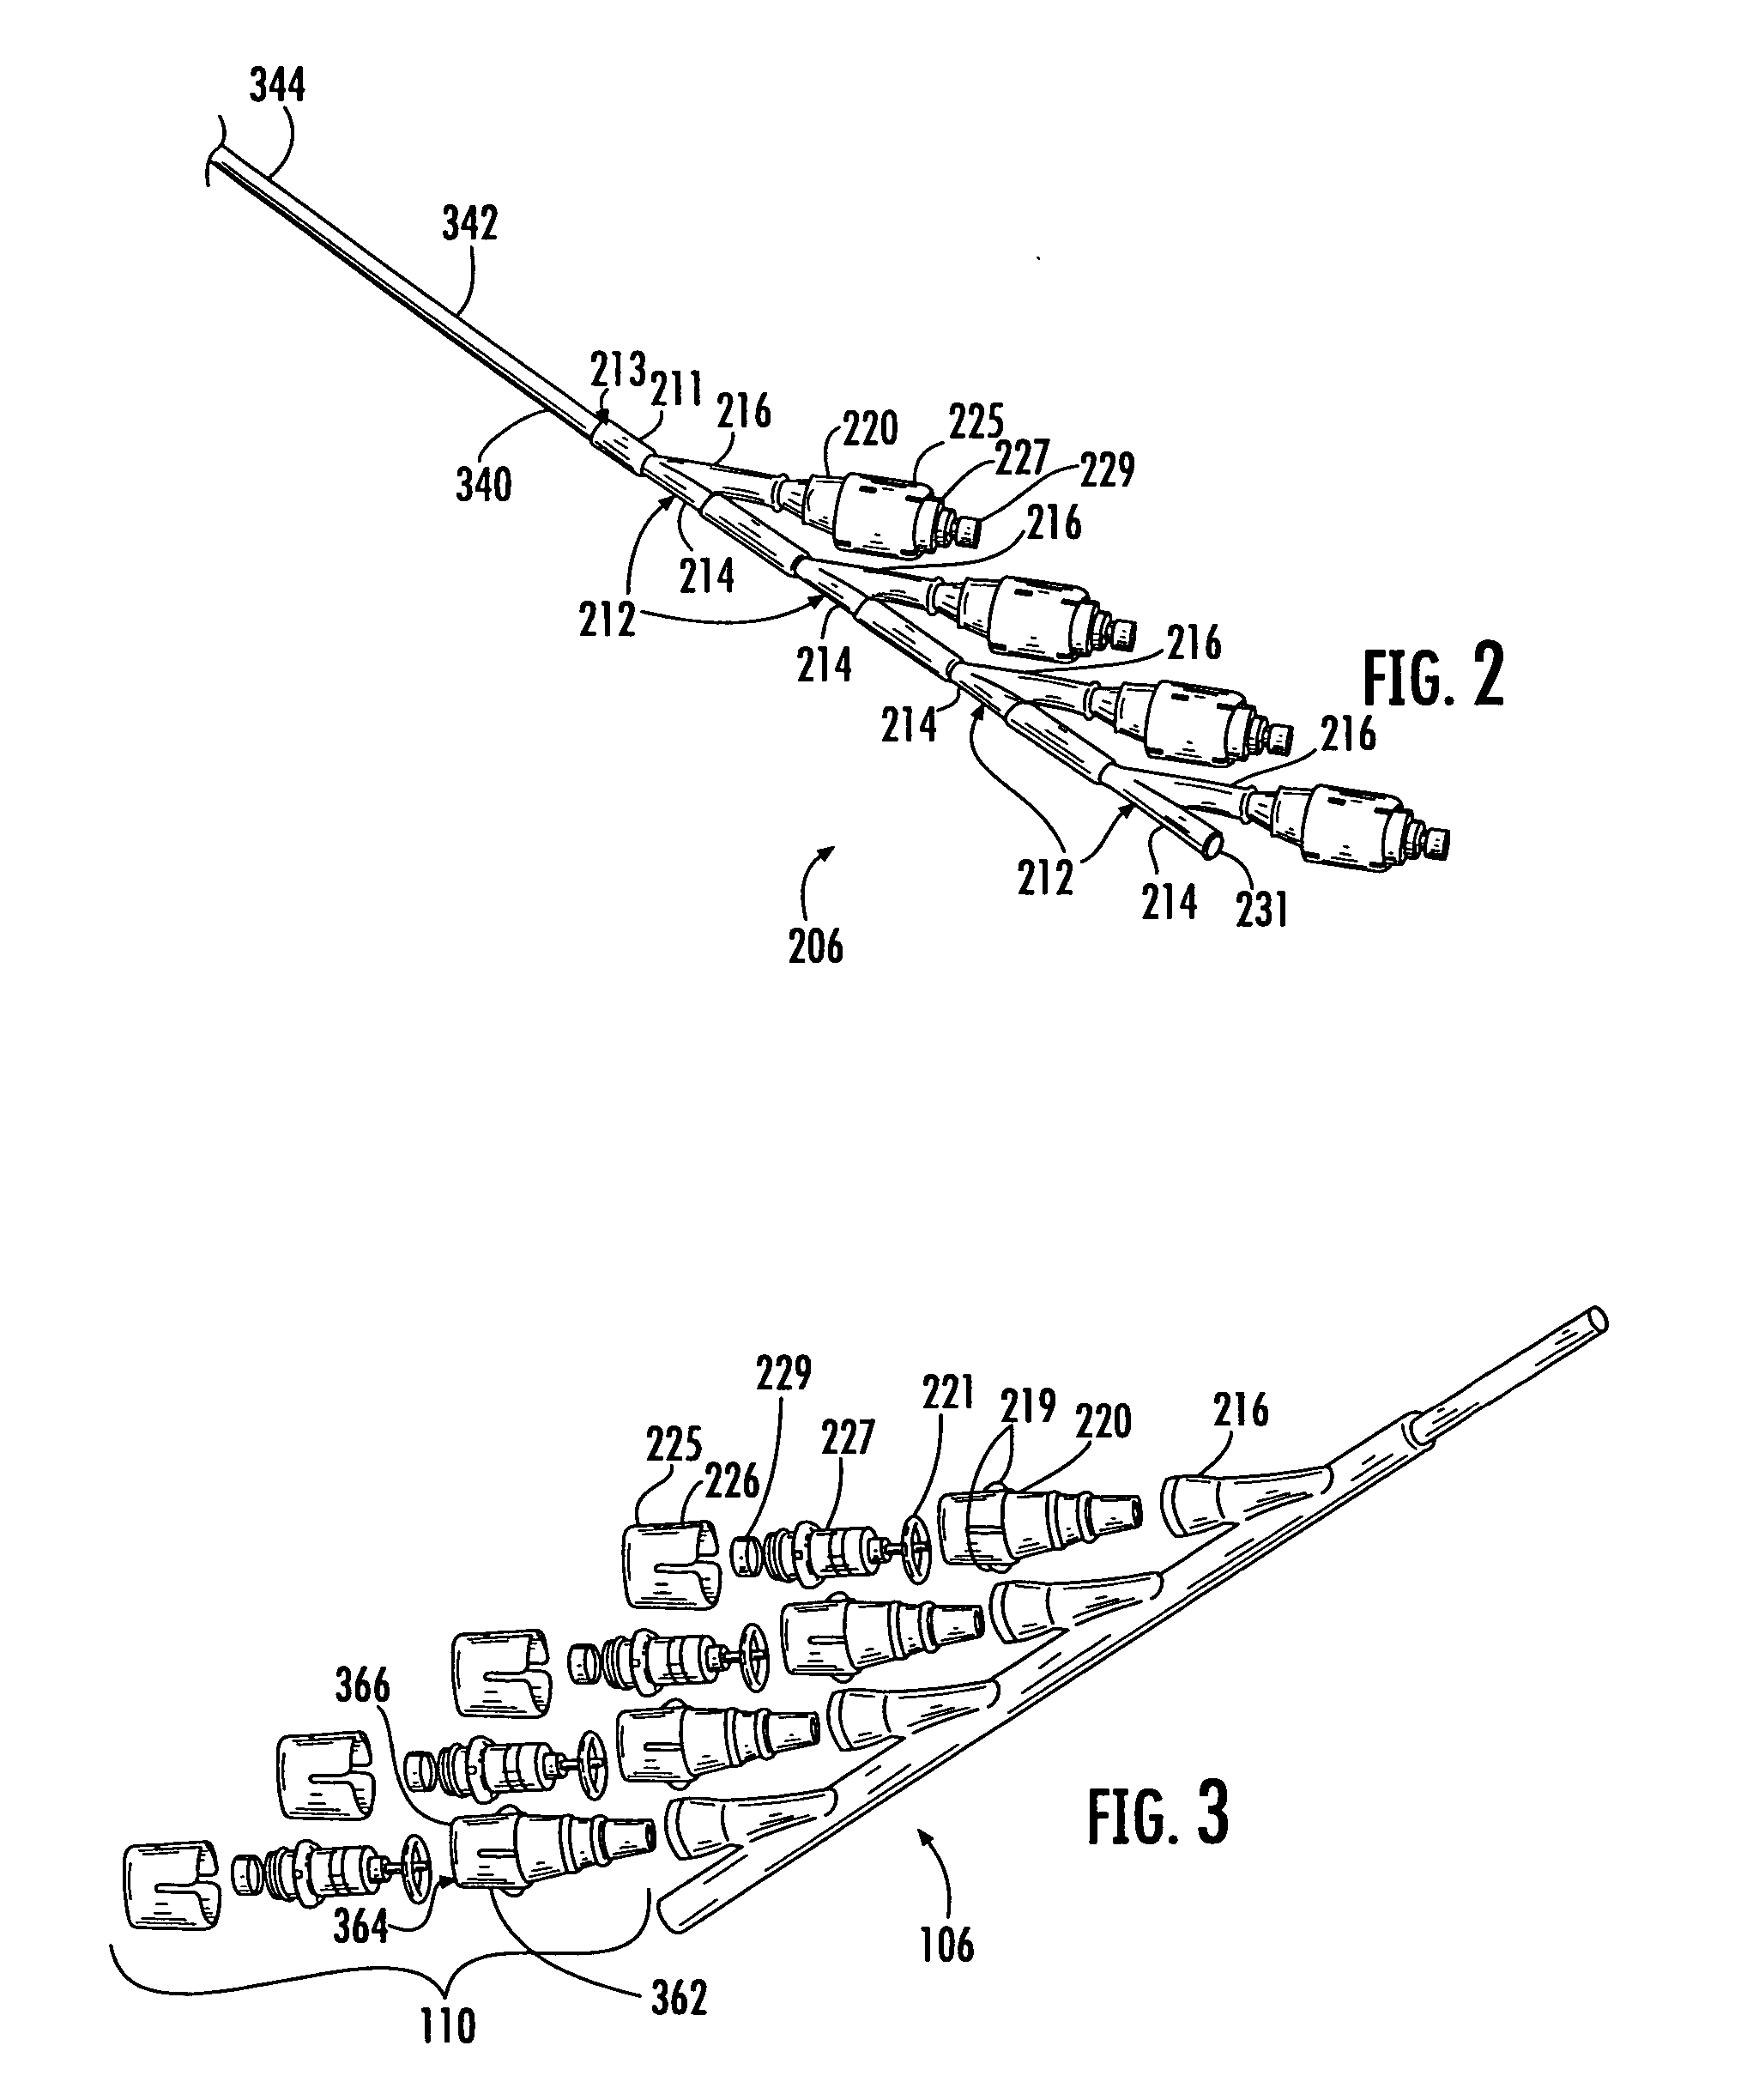 Optical fiber termination apparatus, entry sealing members and methods for using the same